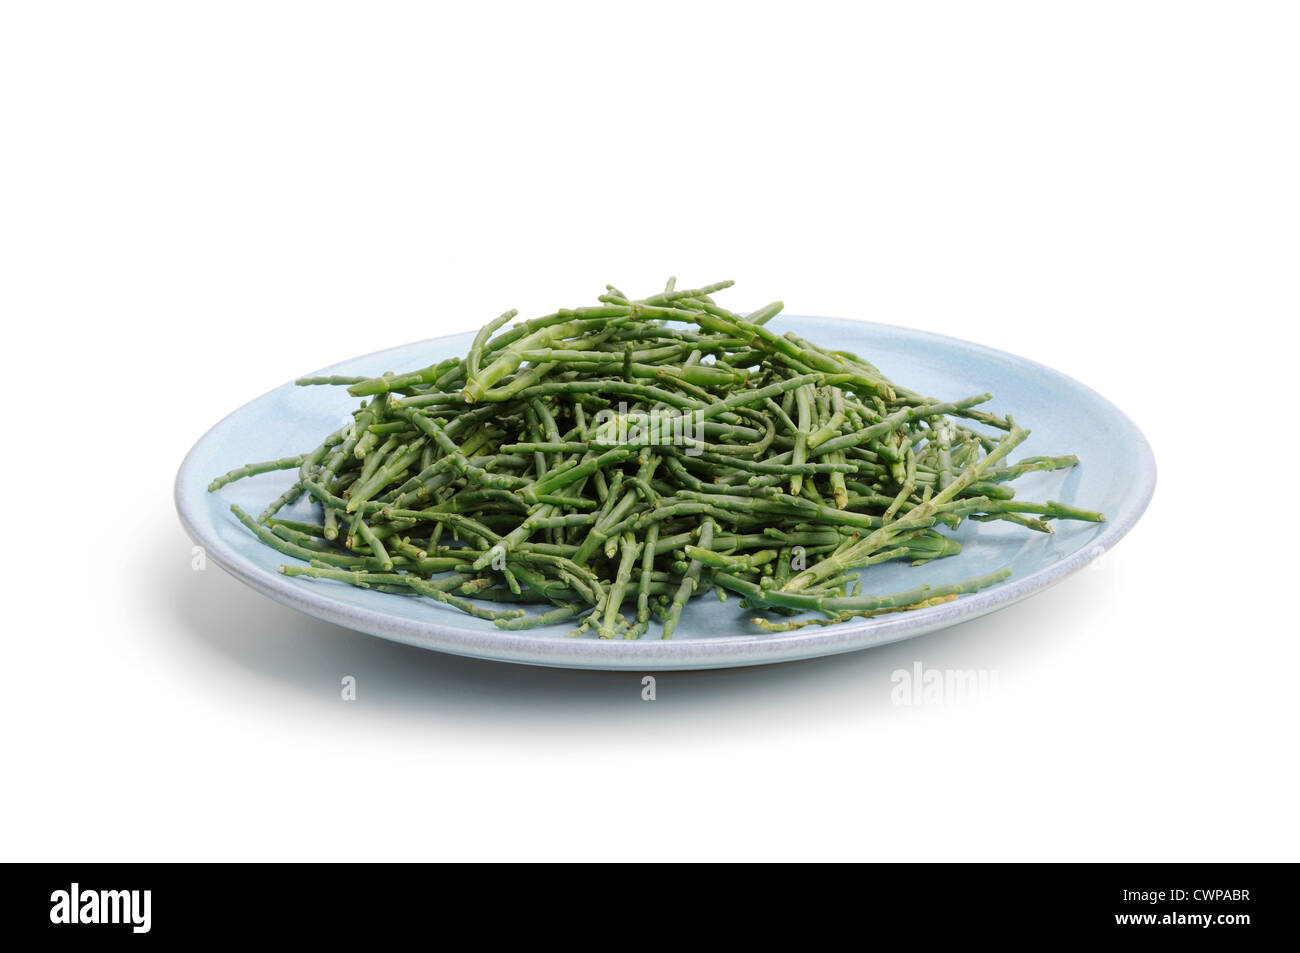 Plate of samphire on white background Stock Photo